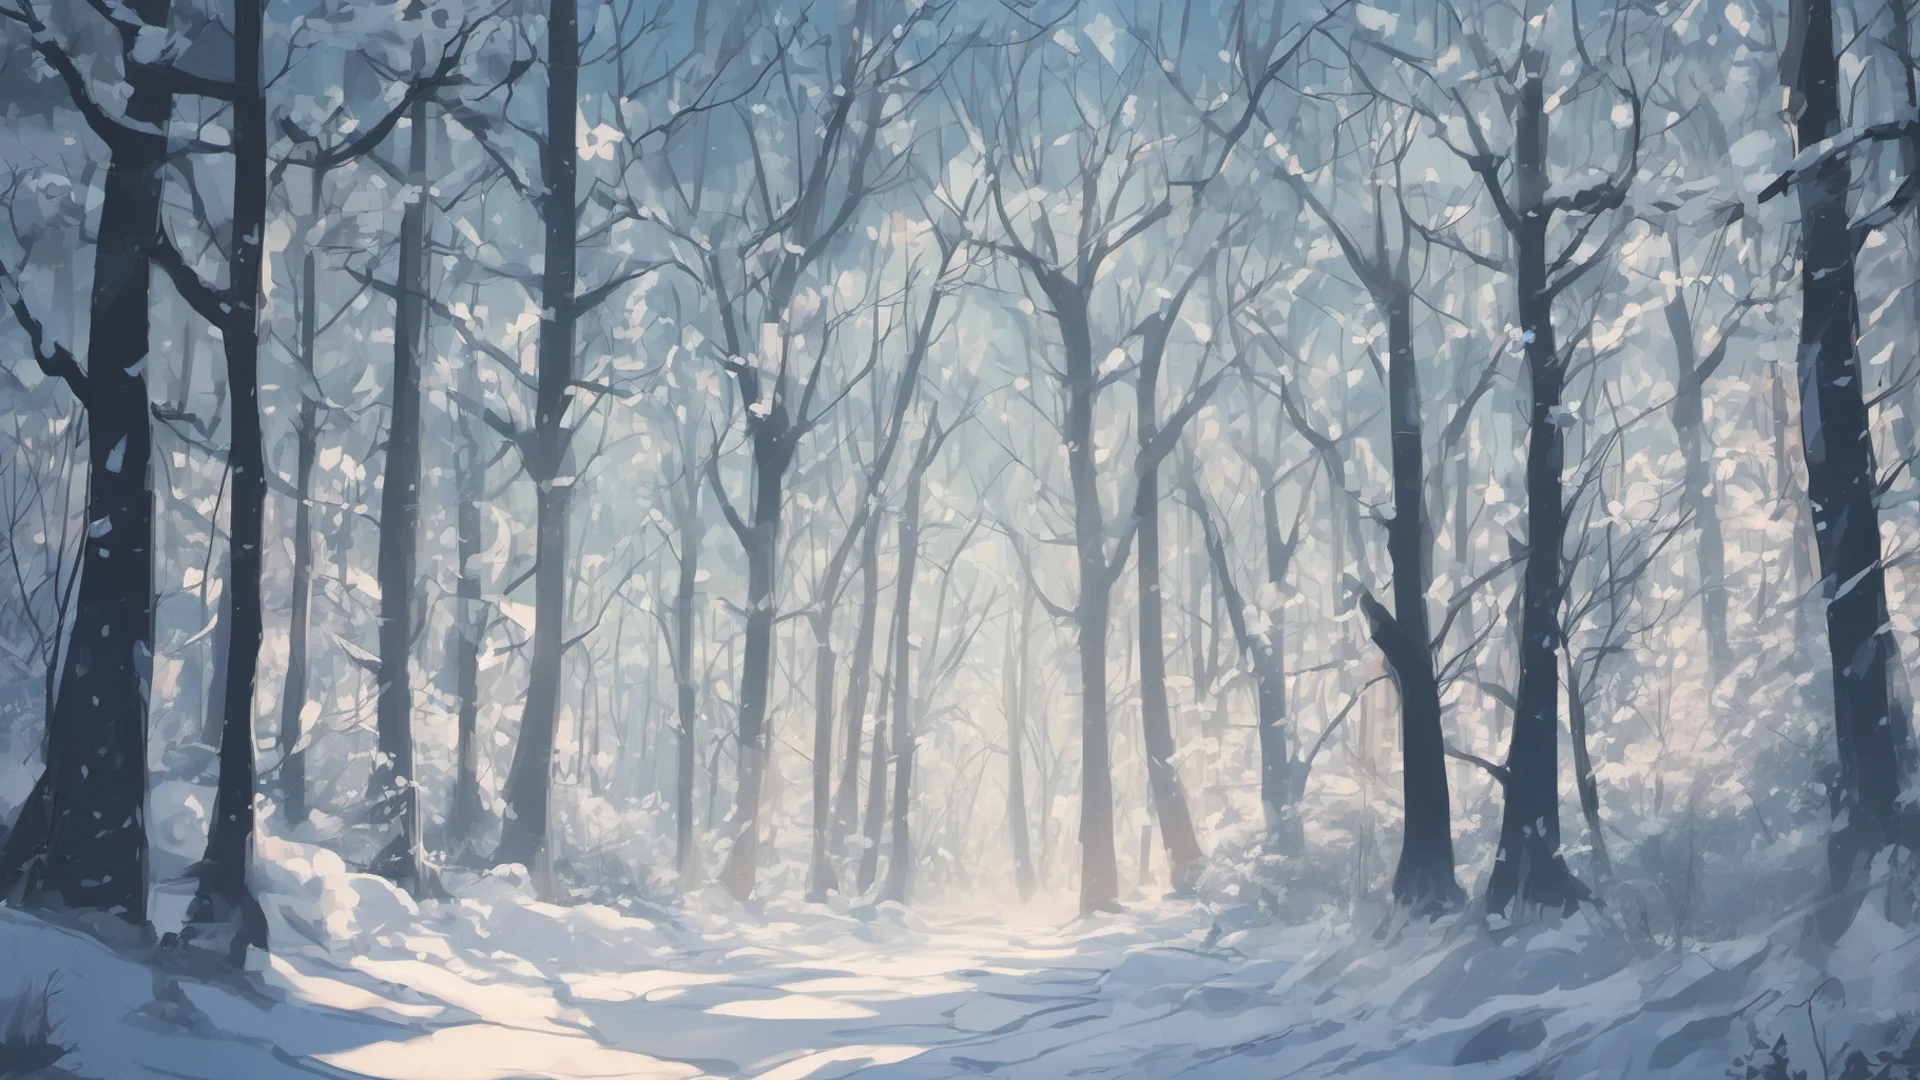 anime style winter forest amazing awesome portrait 2 wide